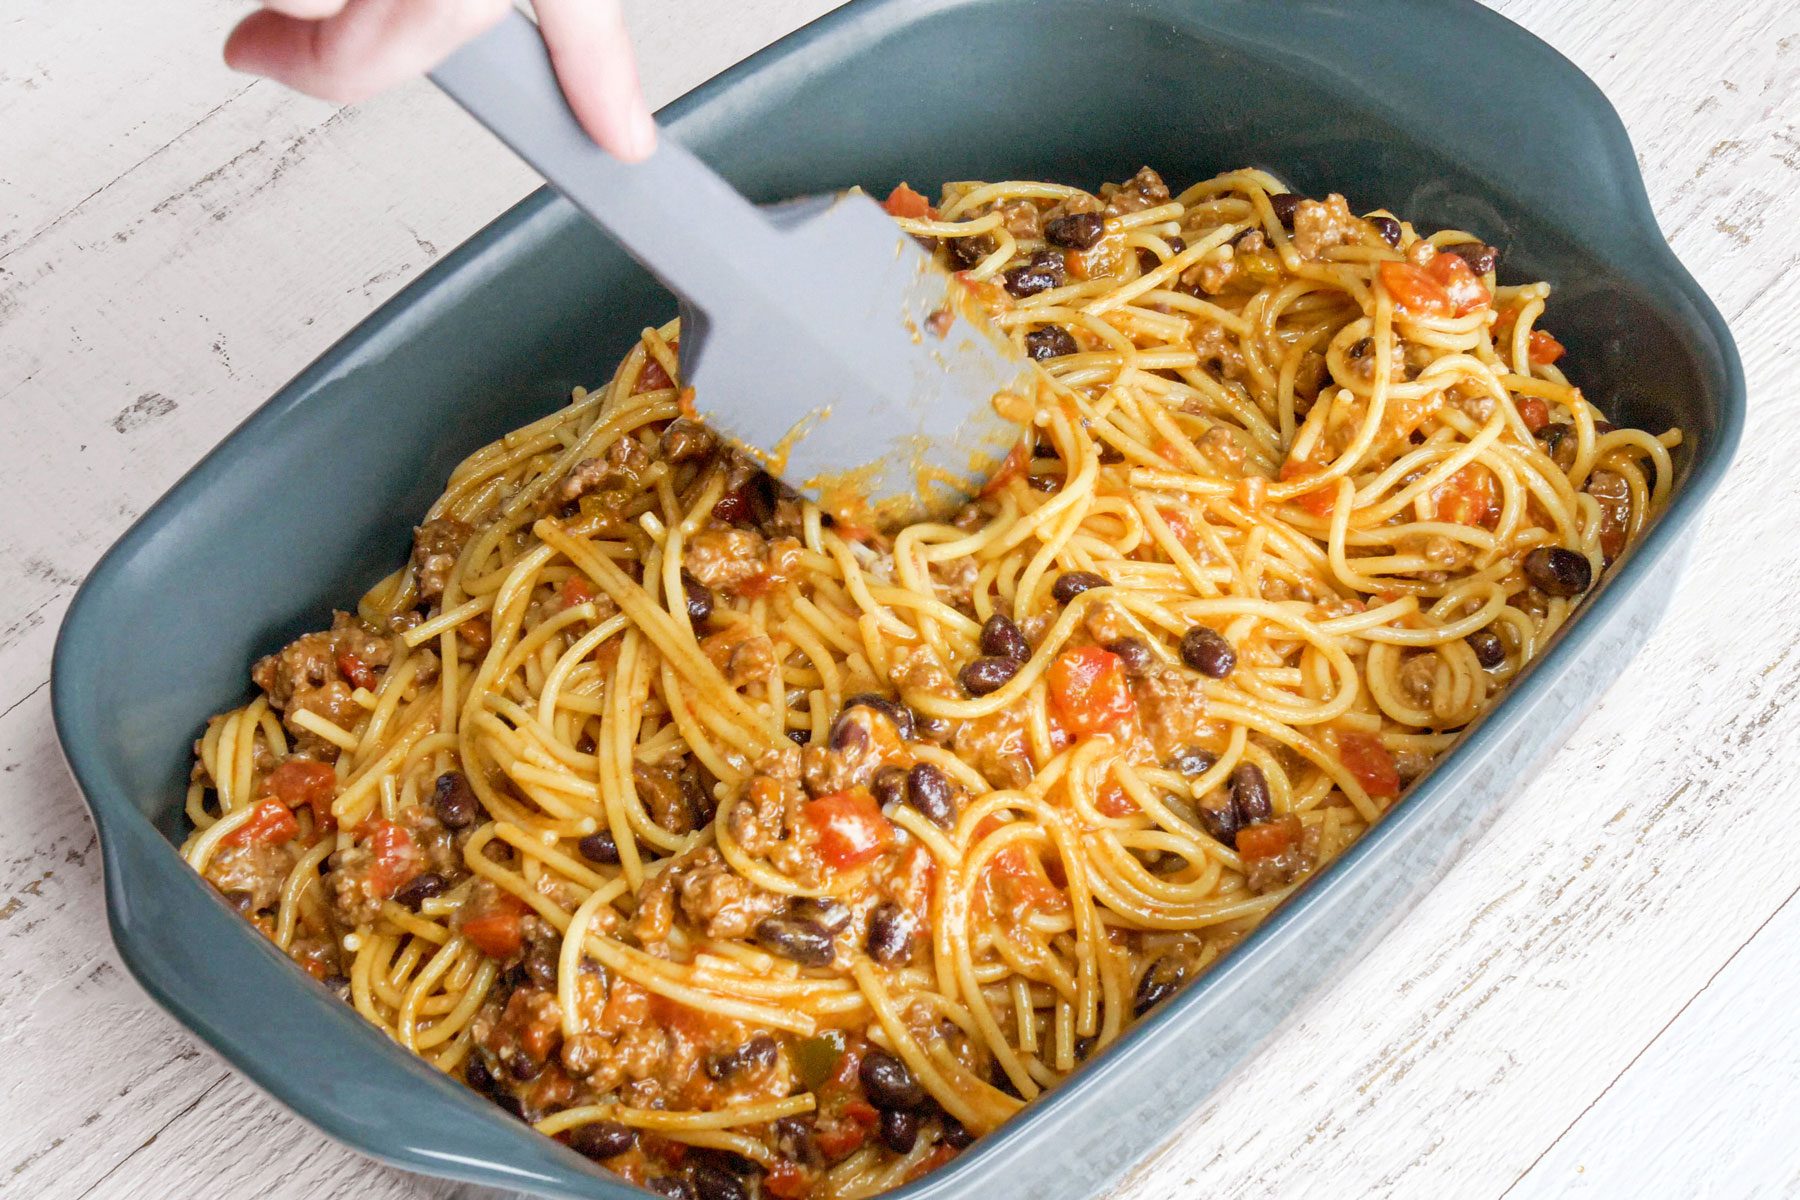 Taco Spaghetti in a baking tray on a wooden table